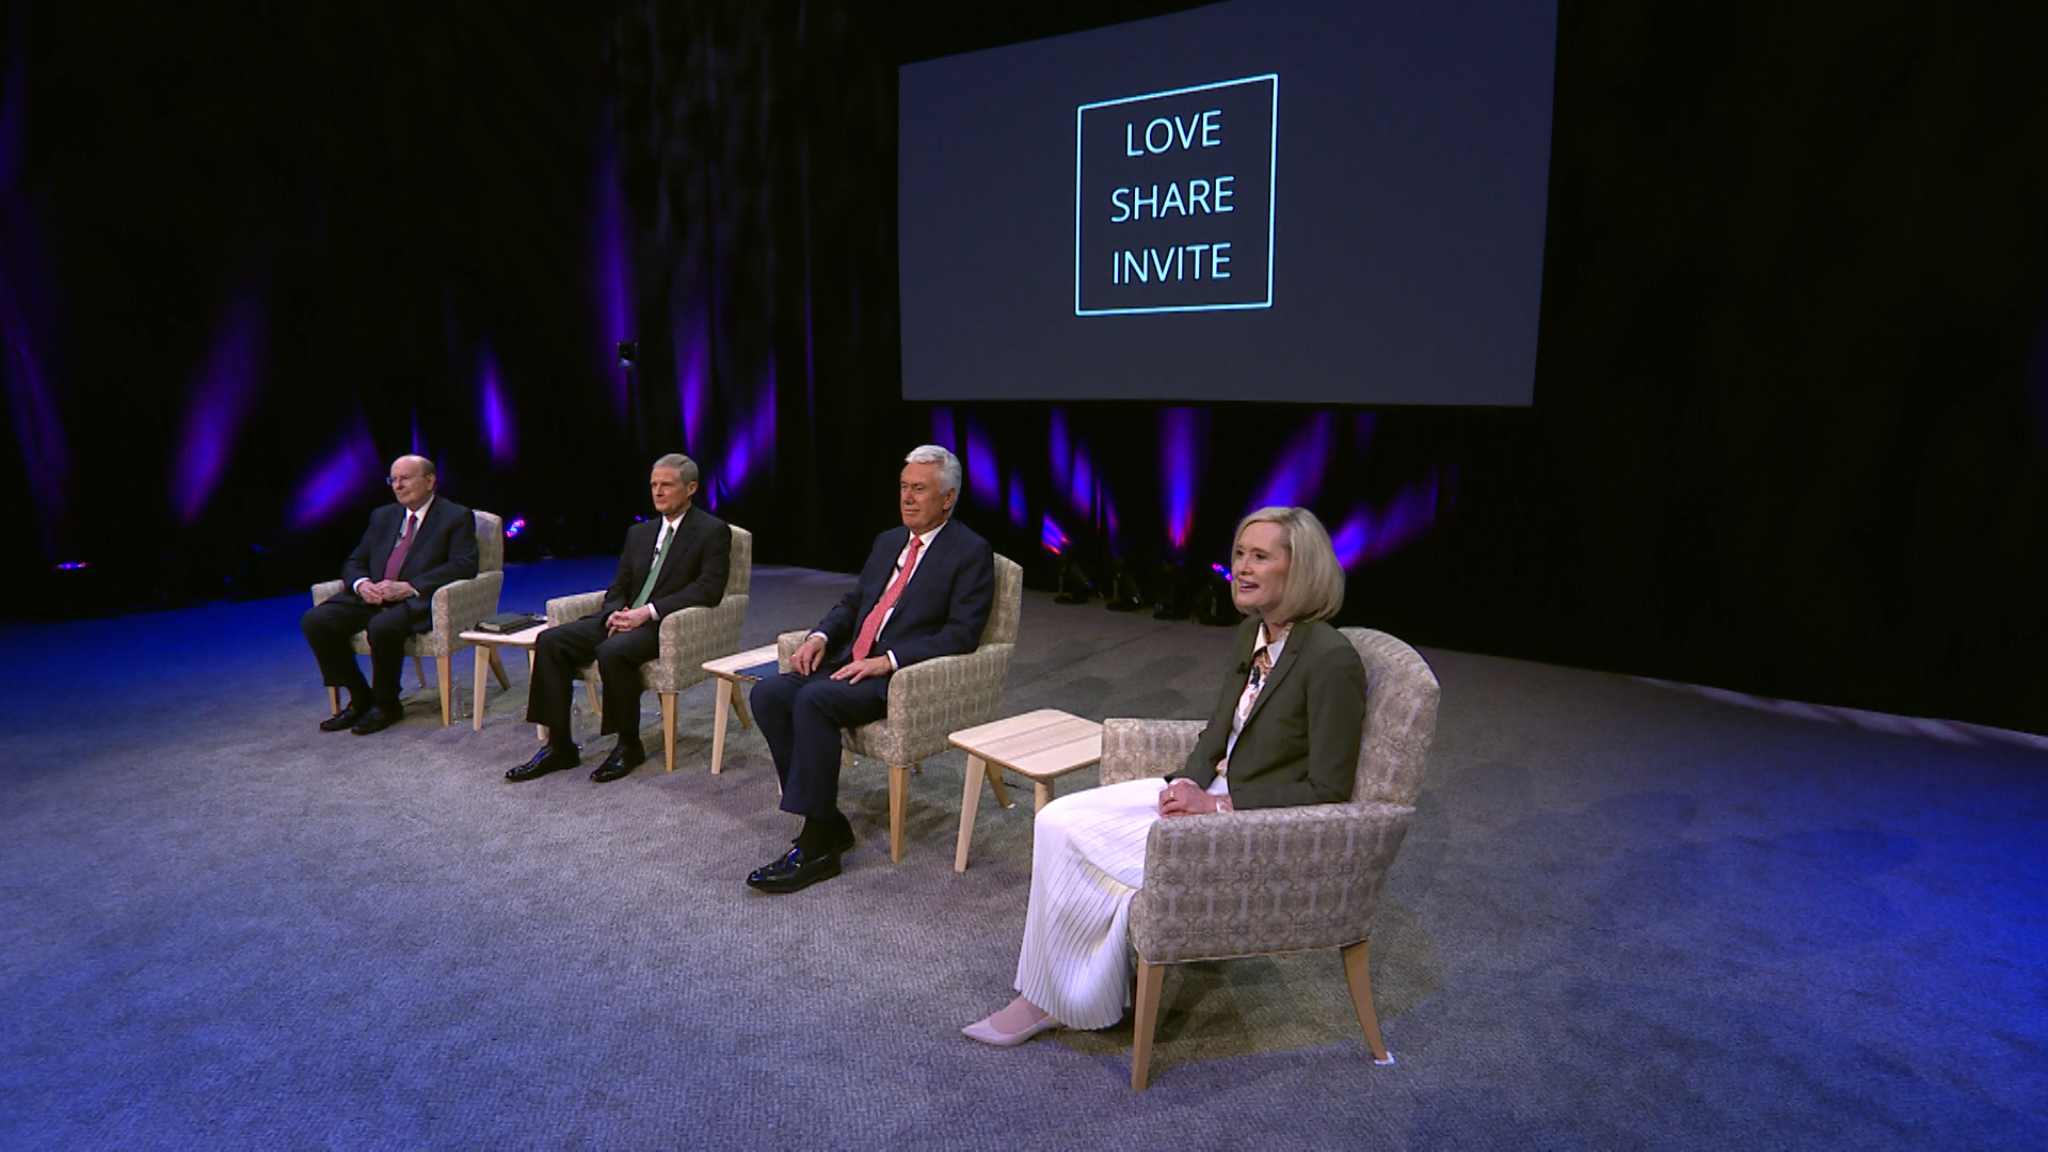 From left, Elder Quentin L. Cook, Elder David A. Bednar and Elder Dieter F. Uchtdorf of the Quorum of the Twelve Apostles, and Sister Bonnie H. Cordon, Young Women general president, join with other Church leaders and youth in a worldwide broadcast on Saturday, June 26, 2021.